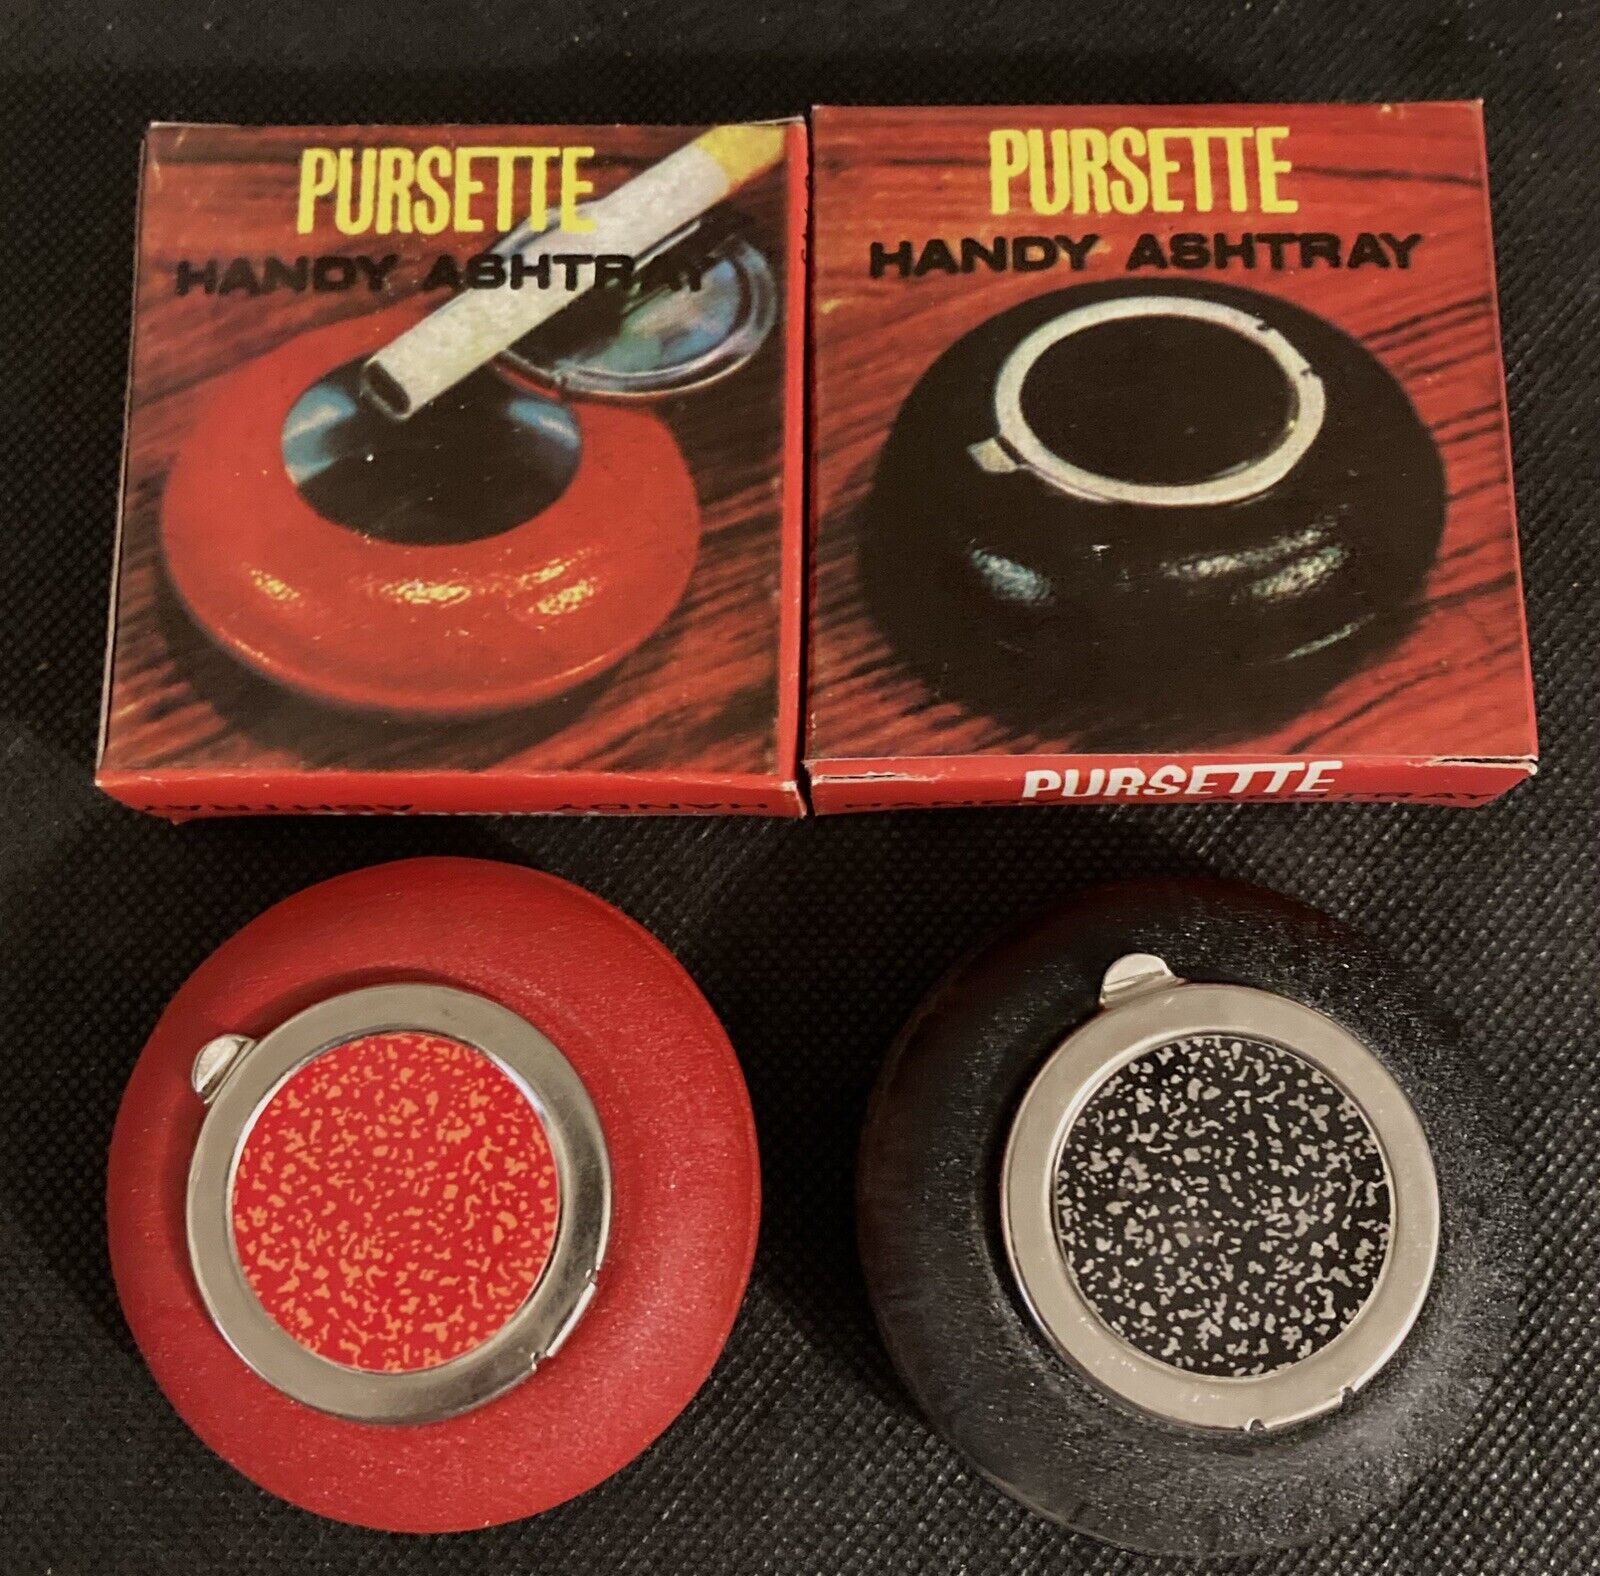 Pursette Portable Ashtrays Vintage Lot of 2 Different Colors (Black and Red)